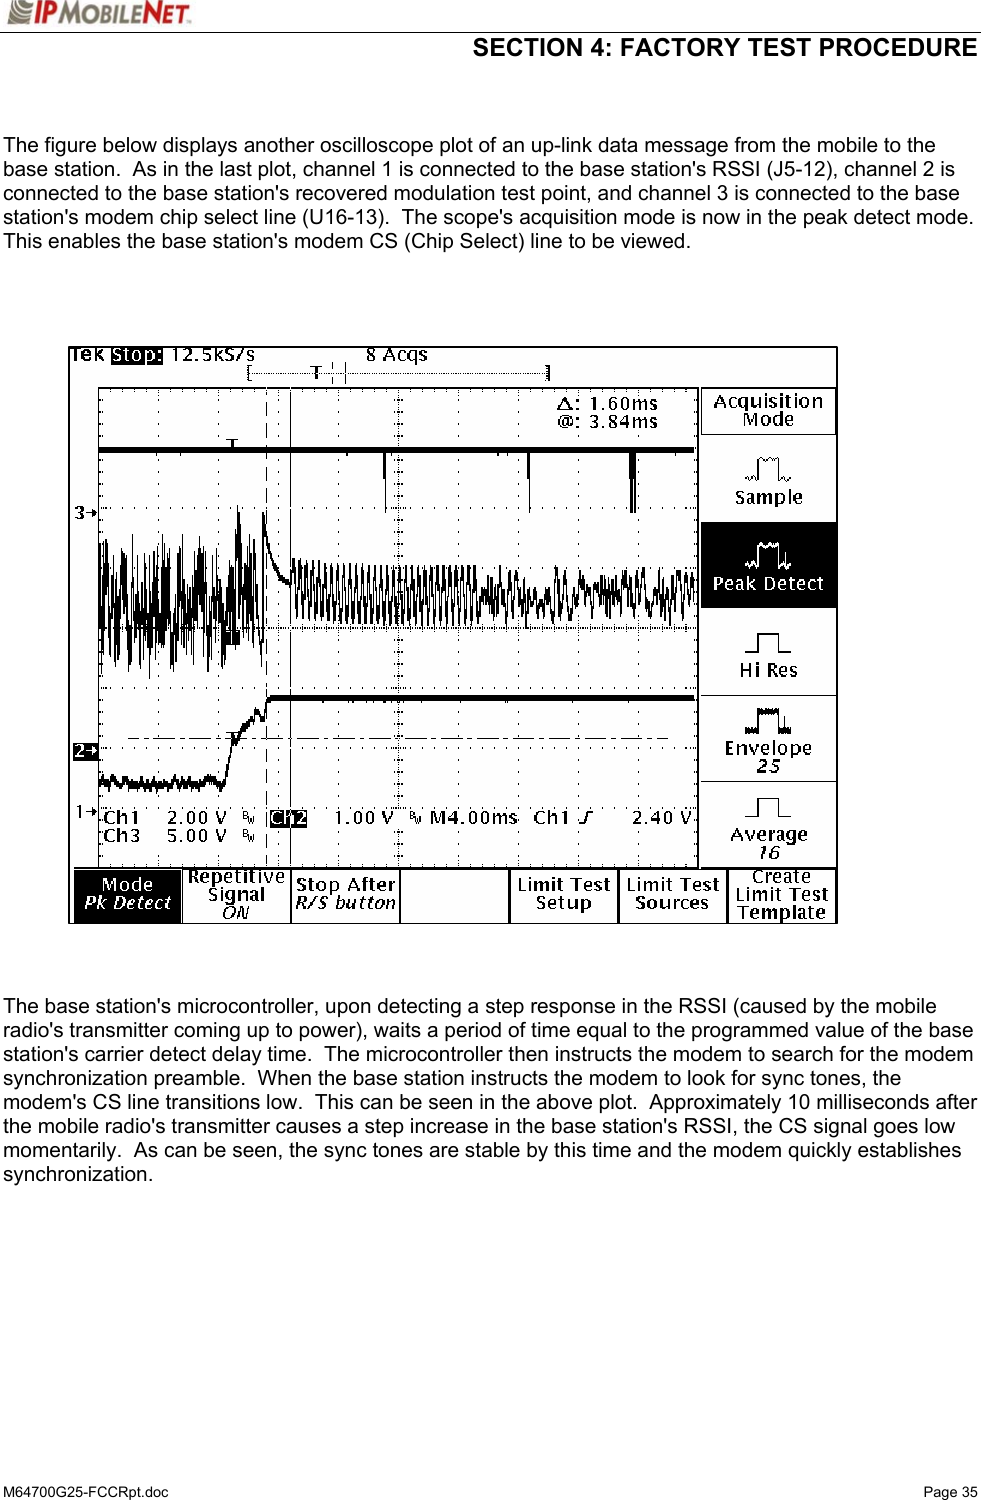  SECTION 4: FACTORY TEST PROCEDURE  M64700G25-FCCRpt.doc   Page 35   The figure below displays another oscilloscope plot of an up-link data message from the mobile to the base station.  As in the last plot, channel 1 is connected to the base station&apos;s RSSI (J5-12), channel 2 is connected to the base station&apos;s recovered modulation test point, and channel 3 is connected to the base station&apos;s modem chip select line (U16-13).  The scope&apos;s acquisition mode is now in the peak detect mode.  This enables the base station&apos;s modem CS (Chip Select) line to be viewed.       The base station&apos;s microcontroller, upon detecting a step response in the RSSI (caused by the mobile radio&apos;s transmitter coming up to power), waits a period of time equal to the programmed value of the base station&apos;s carrier detect delay time.  The microcontroller then instructs the modem to search for the modem synchronization preamble.  When the base station instructs the modem to look for sync tones, the modem&apos;s CS line transitions low.  This can be seen in the above plot.  Approximately 10 milliseconds after the mobile radio&apos;s transmitter causes a step increase in the base station&apos;s RSSI, the CS signal goes low momentarily.  As can be seen, the sync tones are stable by this time and the modem quickly establishes synchronization.   